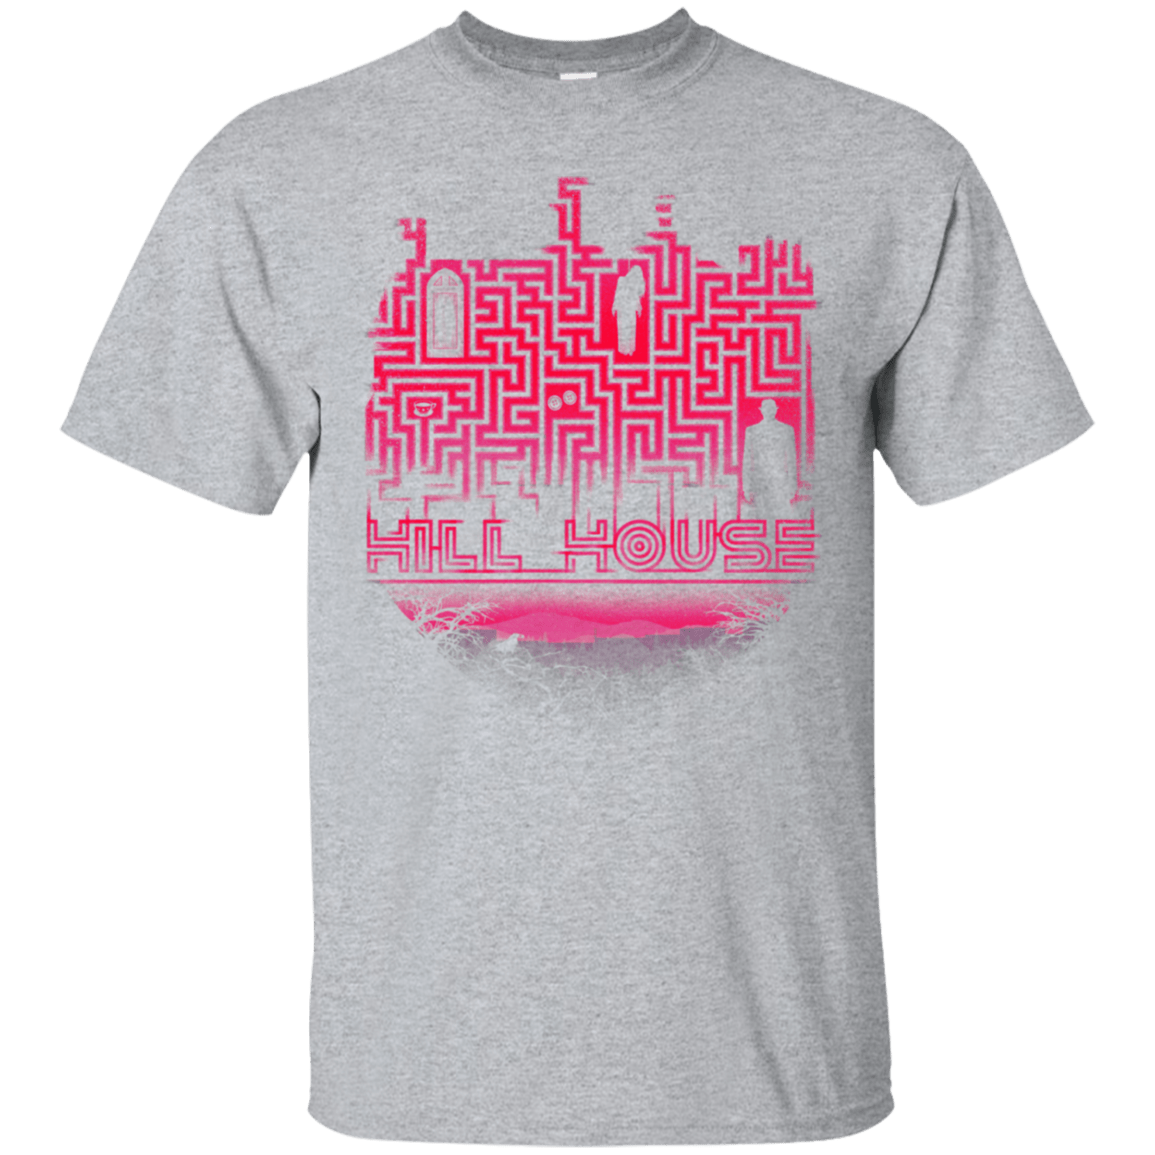 T-Shirts Sport Grey / S Hill House Silhouette T-Shirt